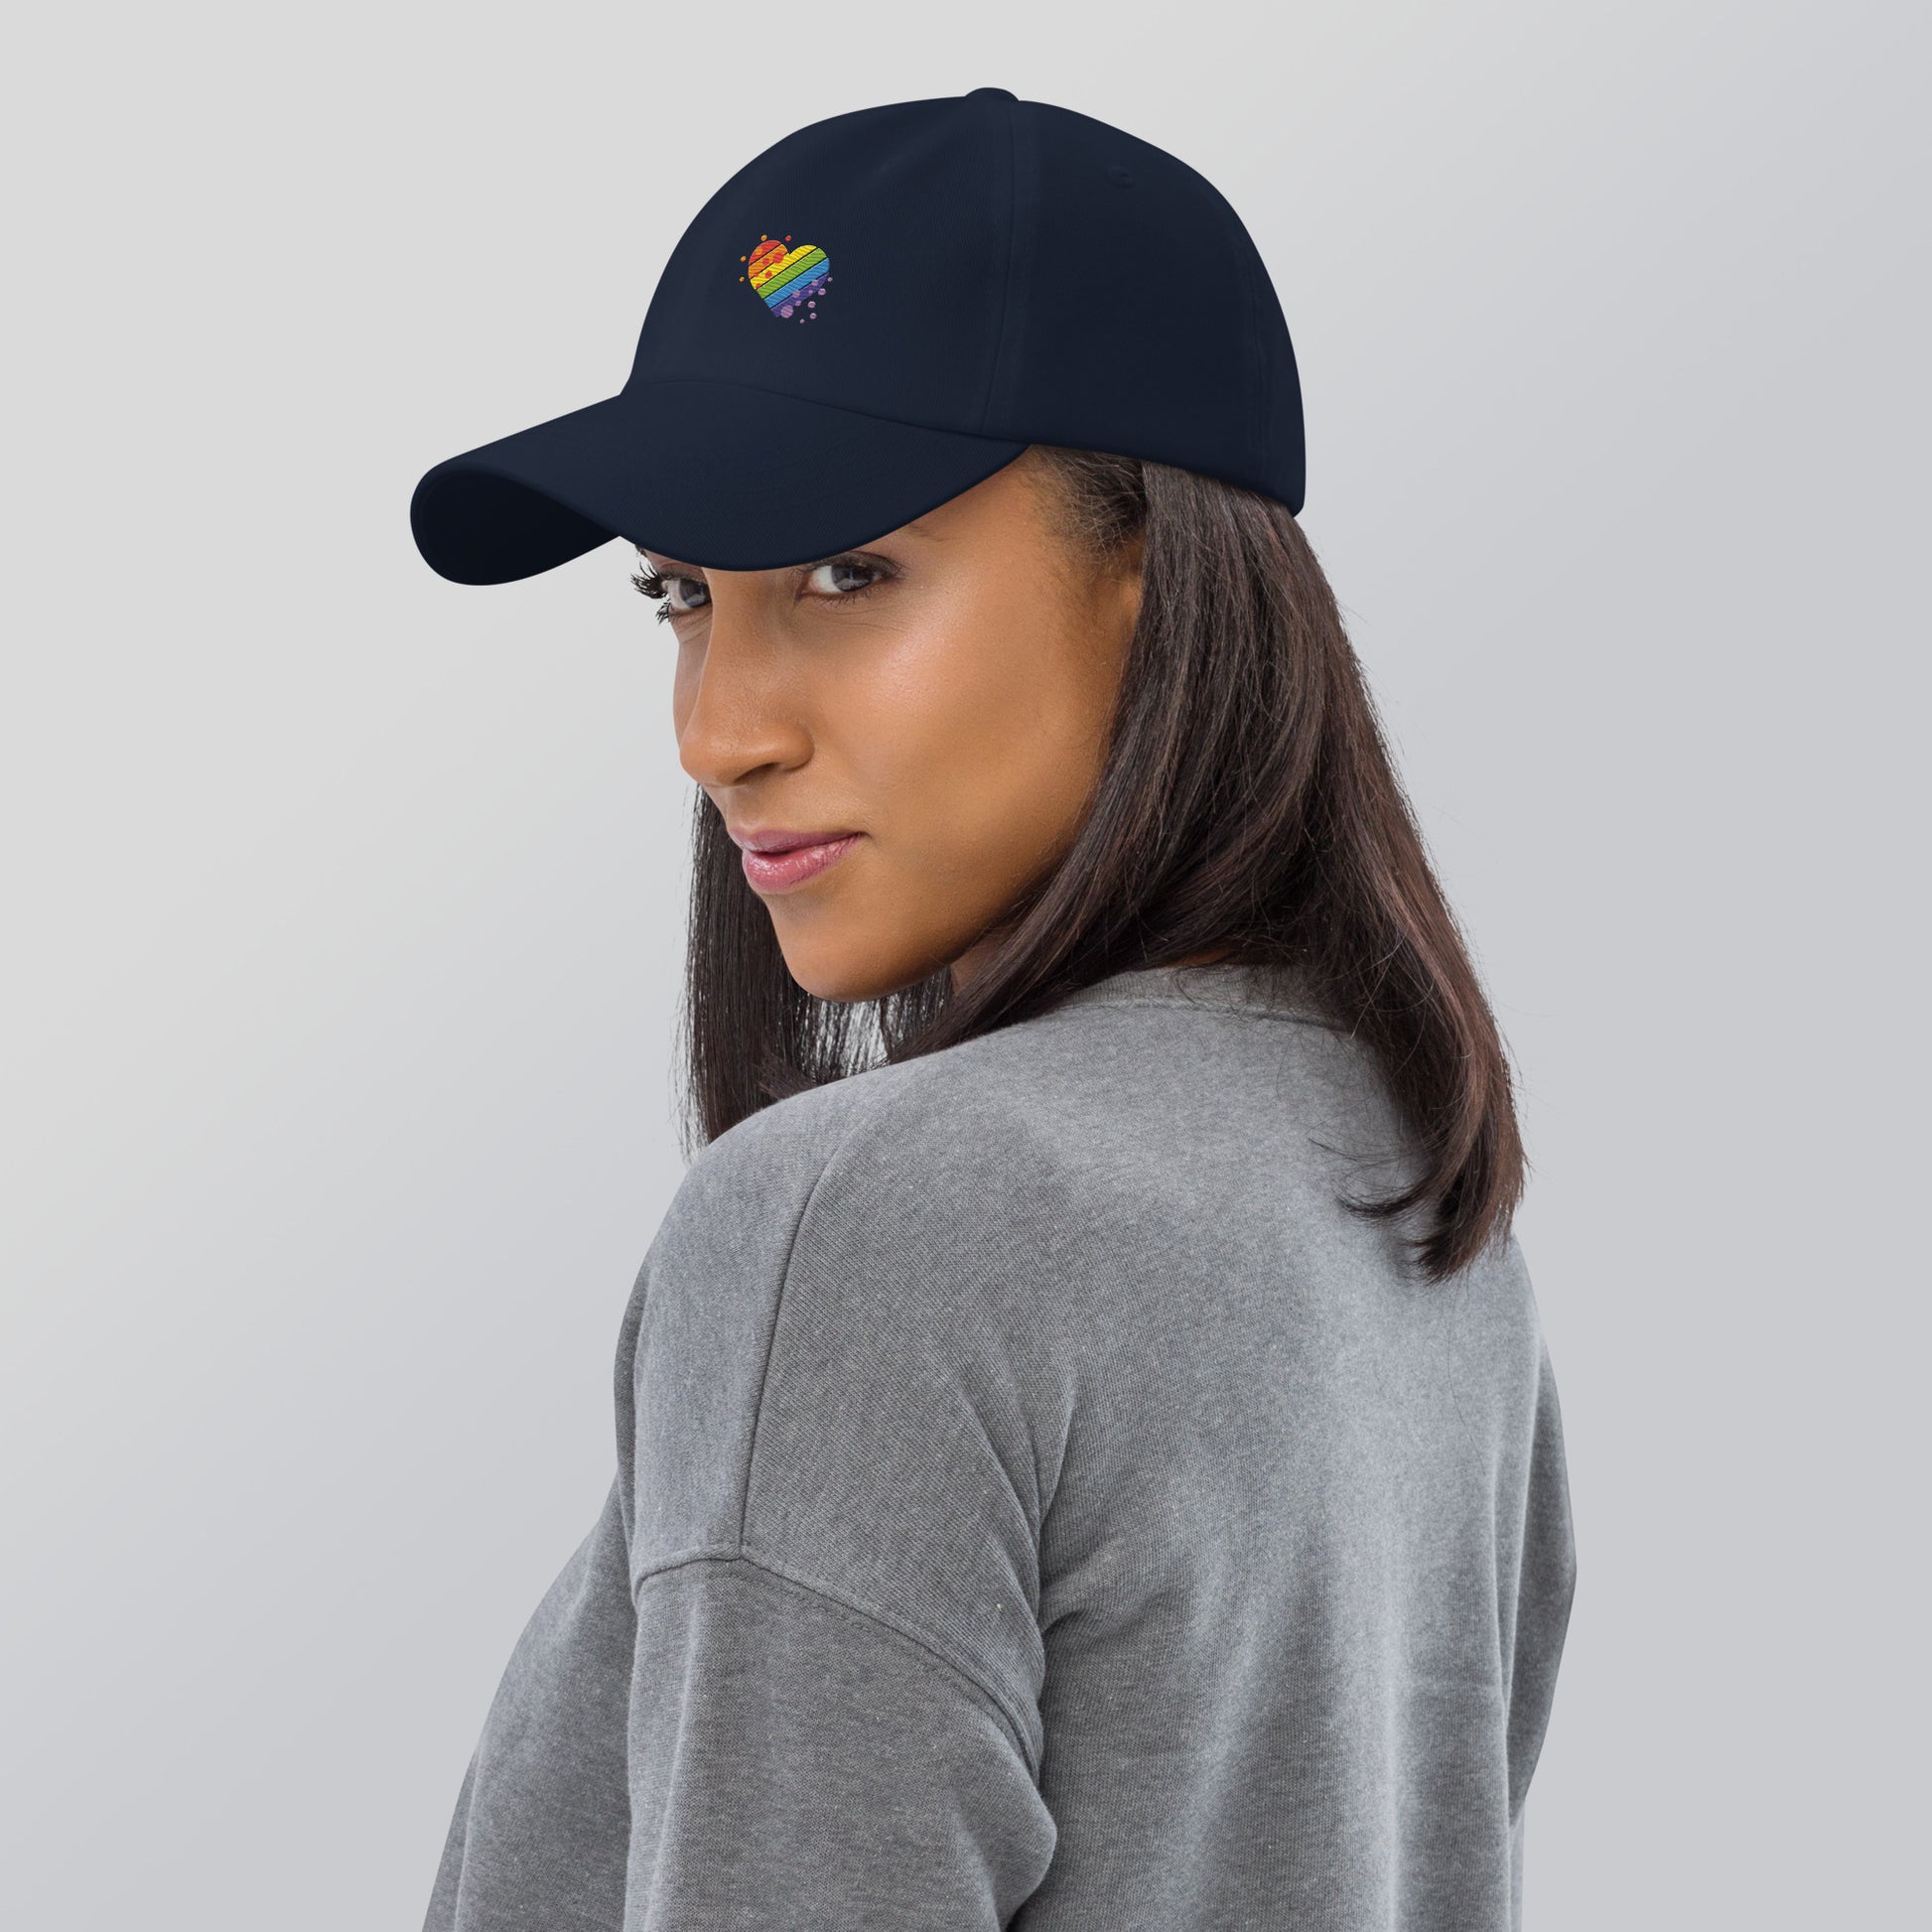 A female model wearing our navy baseball hat featuring rainbow heart design embroidery with a low profile, adjustable strap.